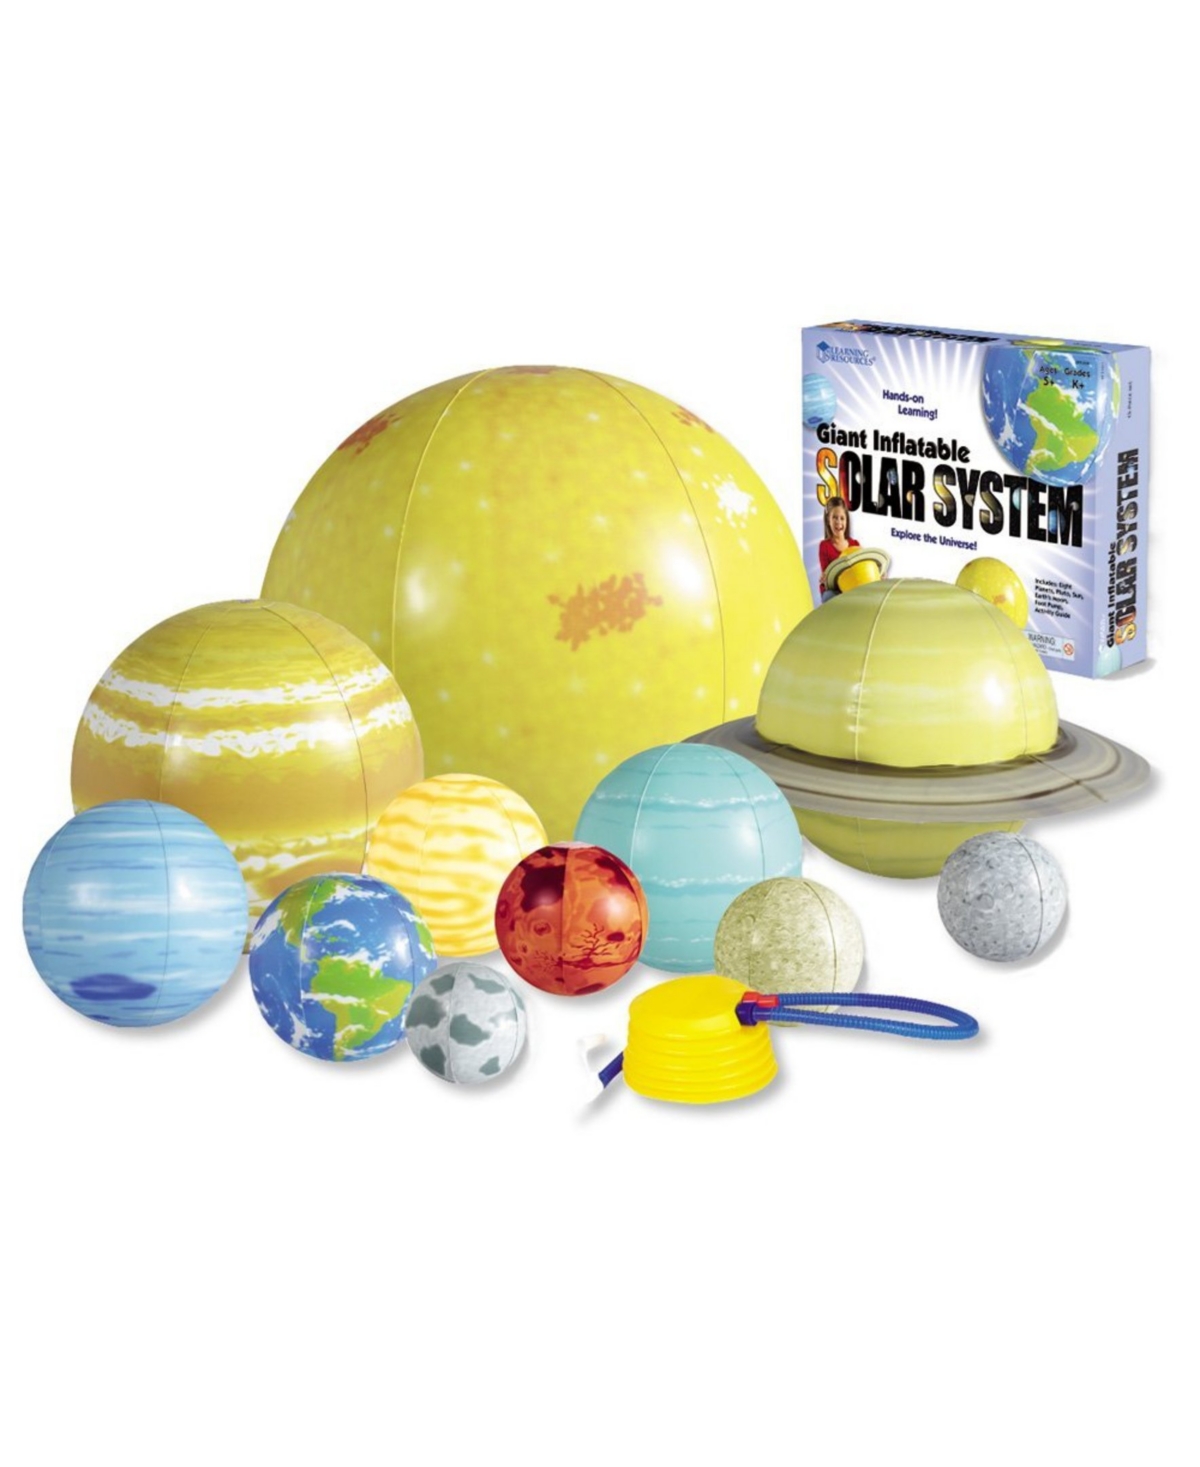 UPC 765023024340 product image for Learning Resources Giant Inflatable Solar System Set | upcitemdb.com